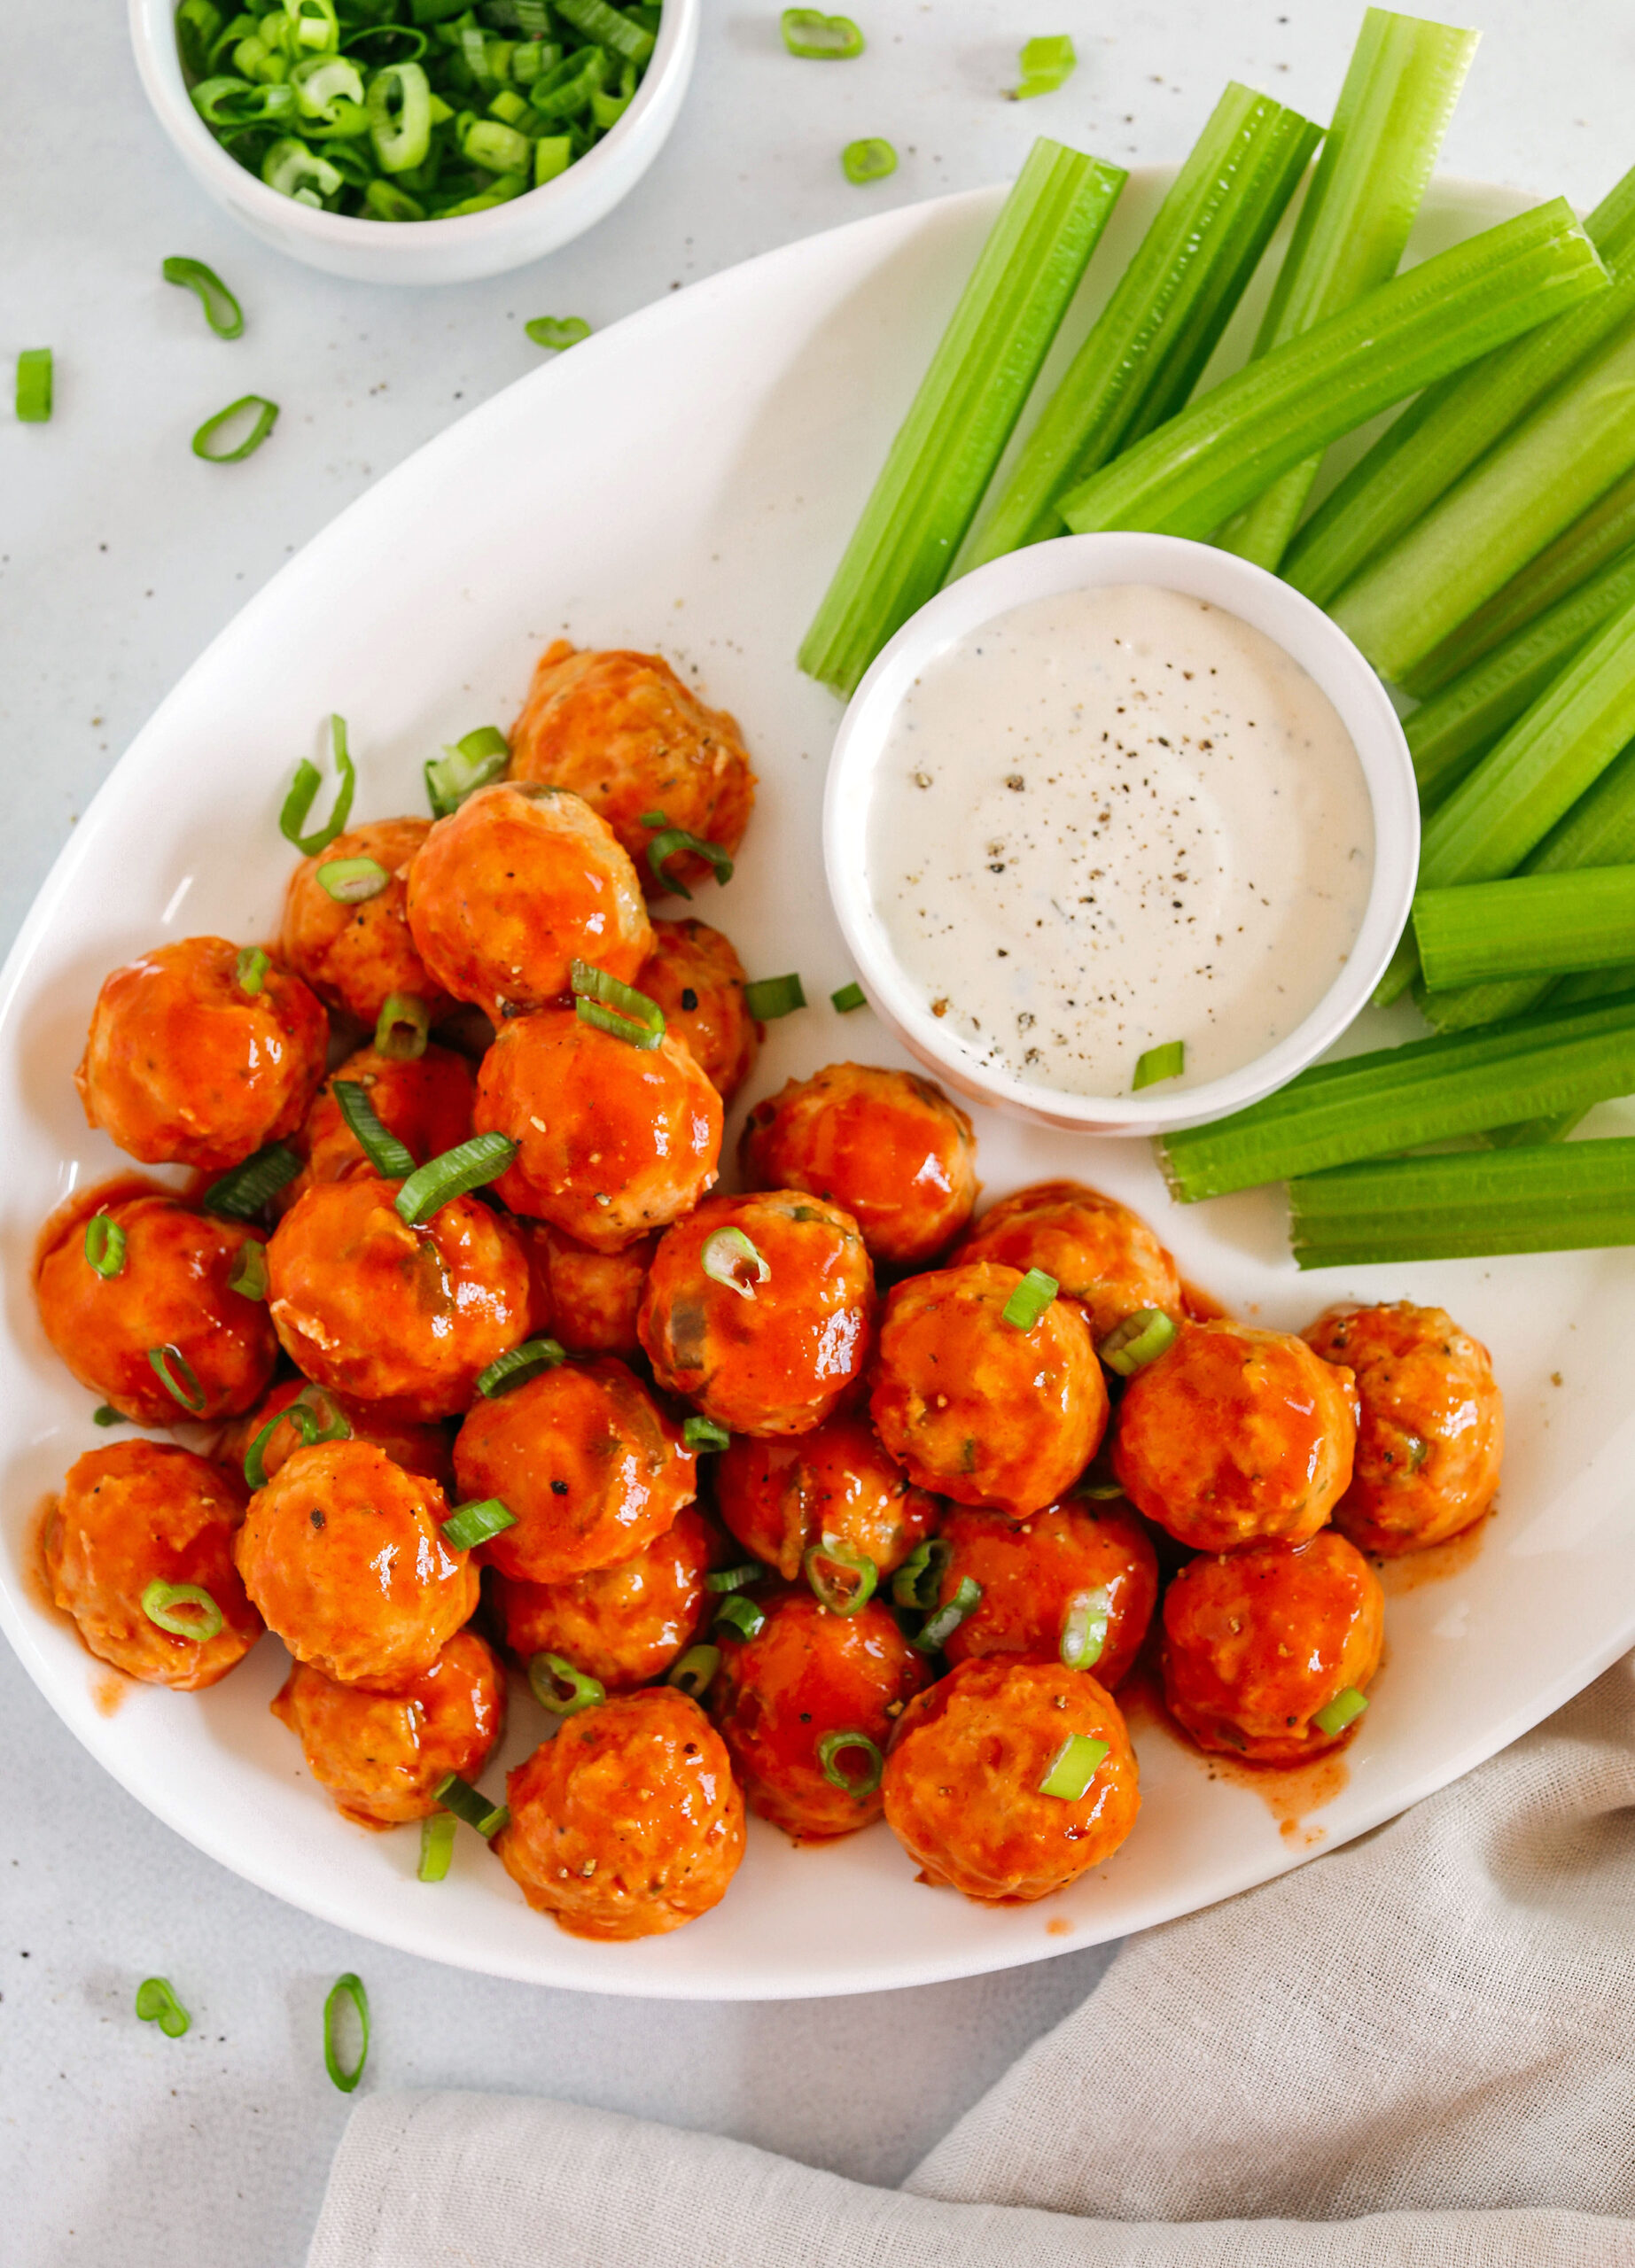 These Buffalo Chicken Meatballs make the perfect party appetizer, game day snack or healthy weeknight dinner!  Easily made with just a few simple ingredients for delicious flavor-packed meatballs served with fresh veggies and your favorite dipping sauce!